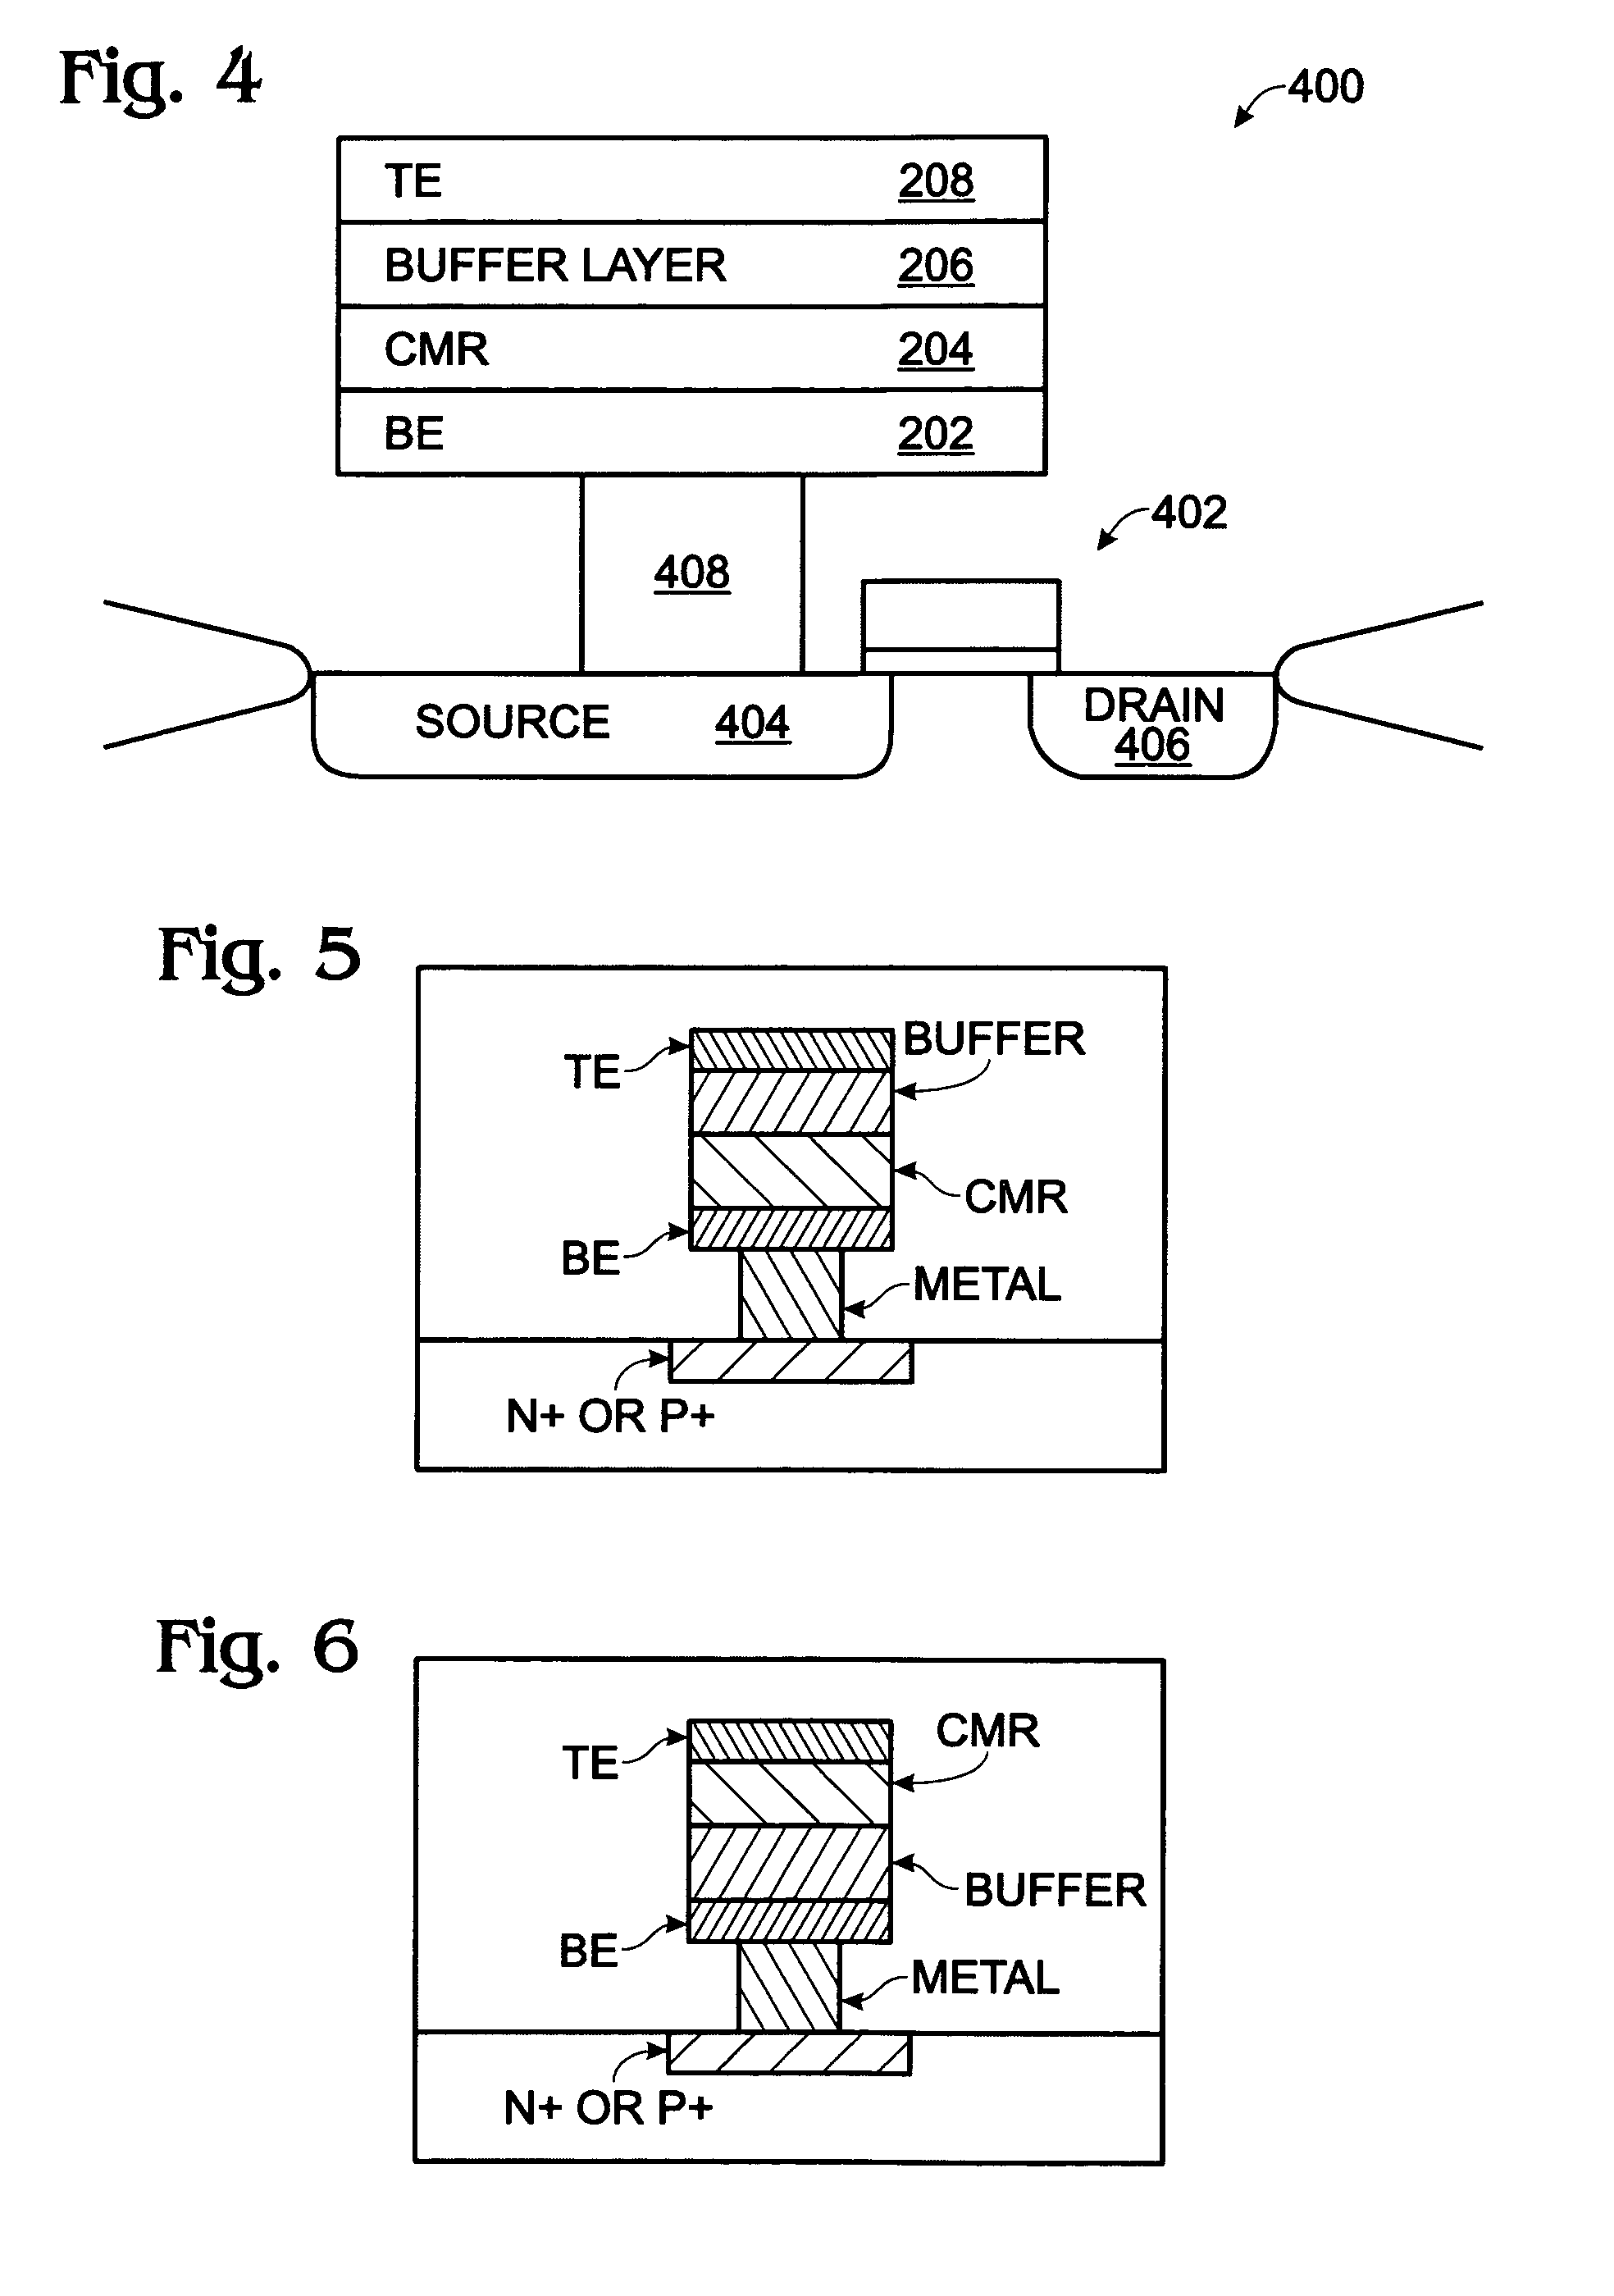 Buffered-layer memory cell